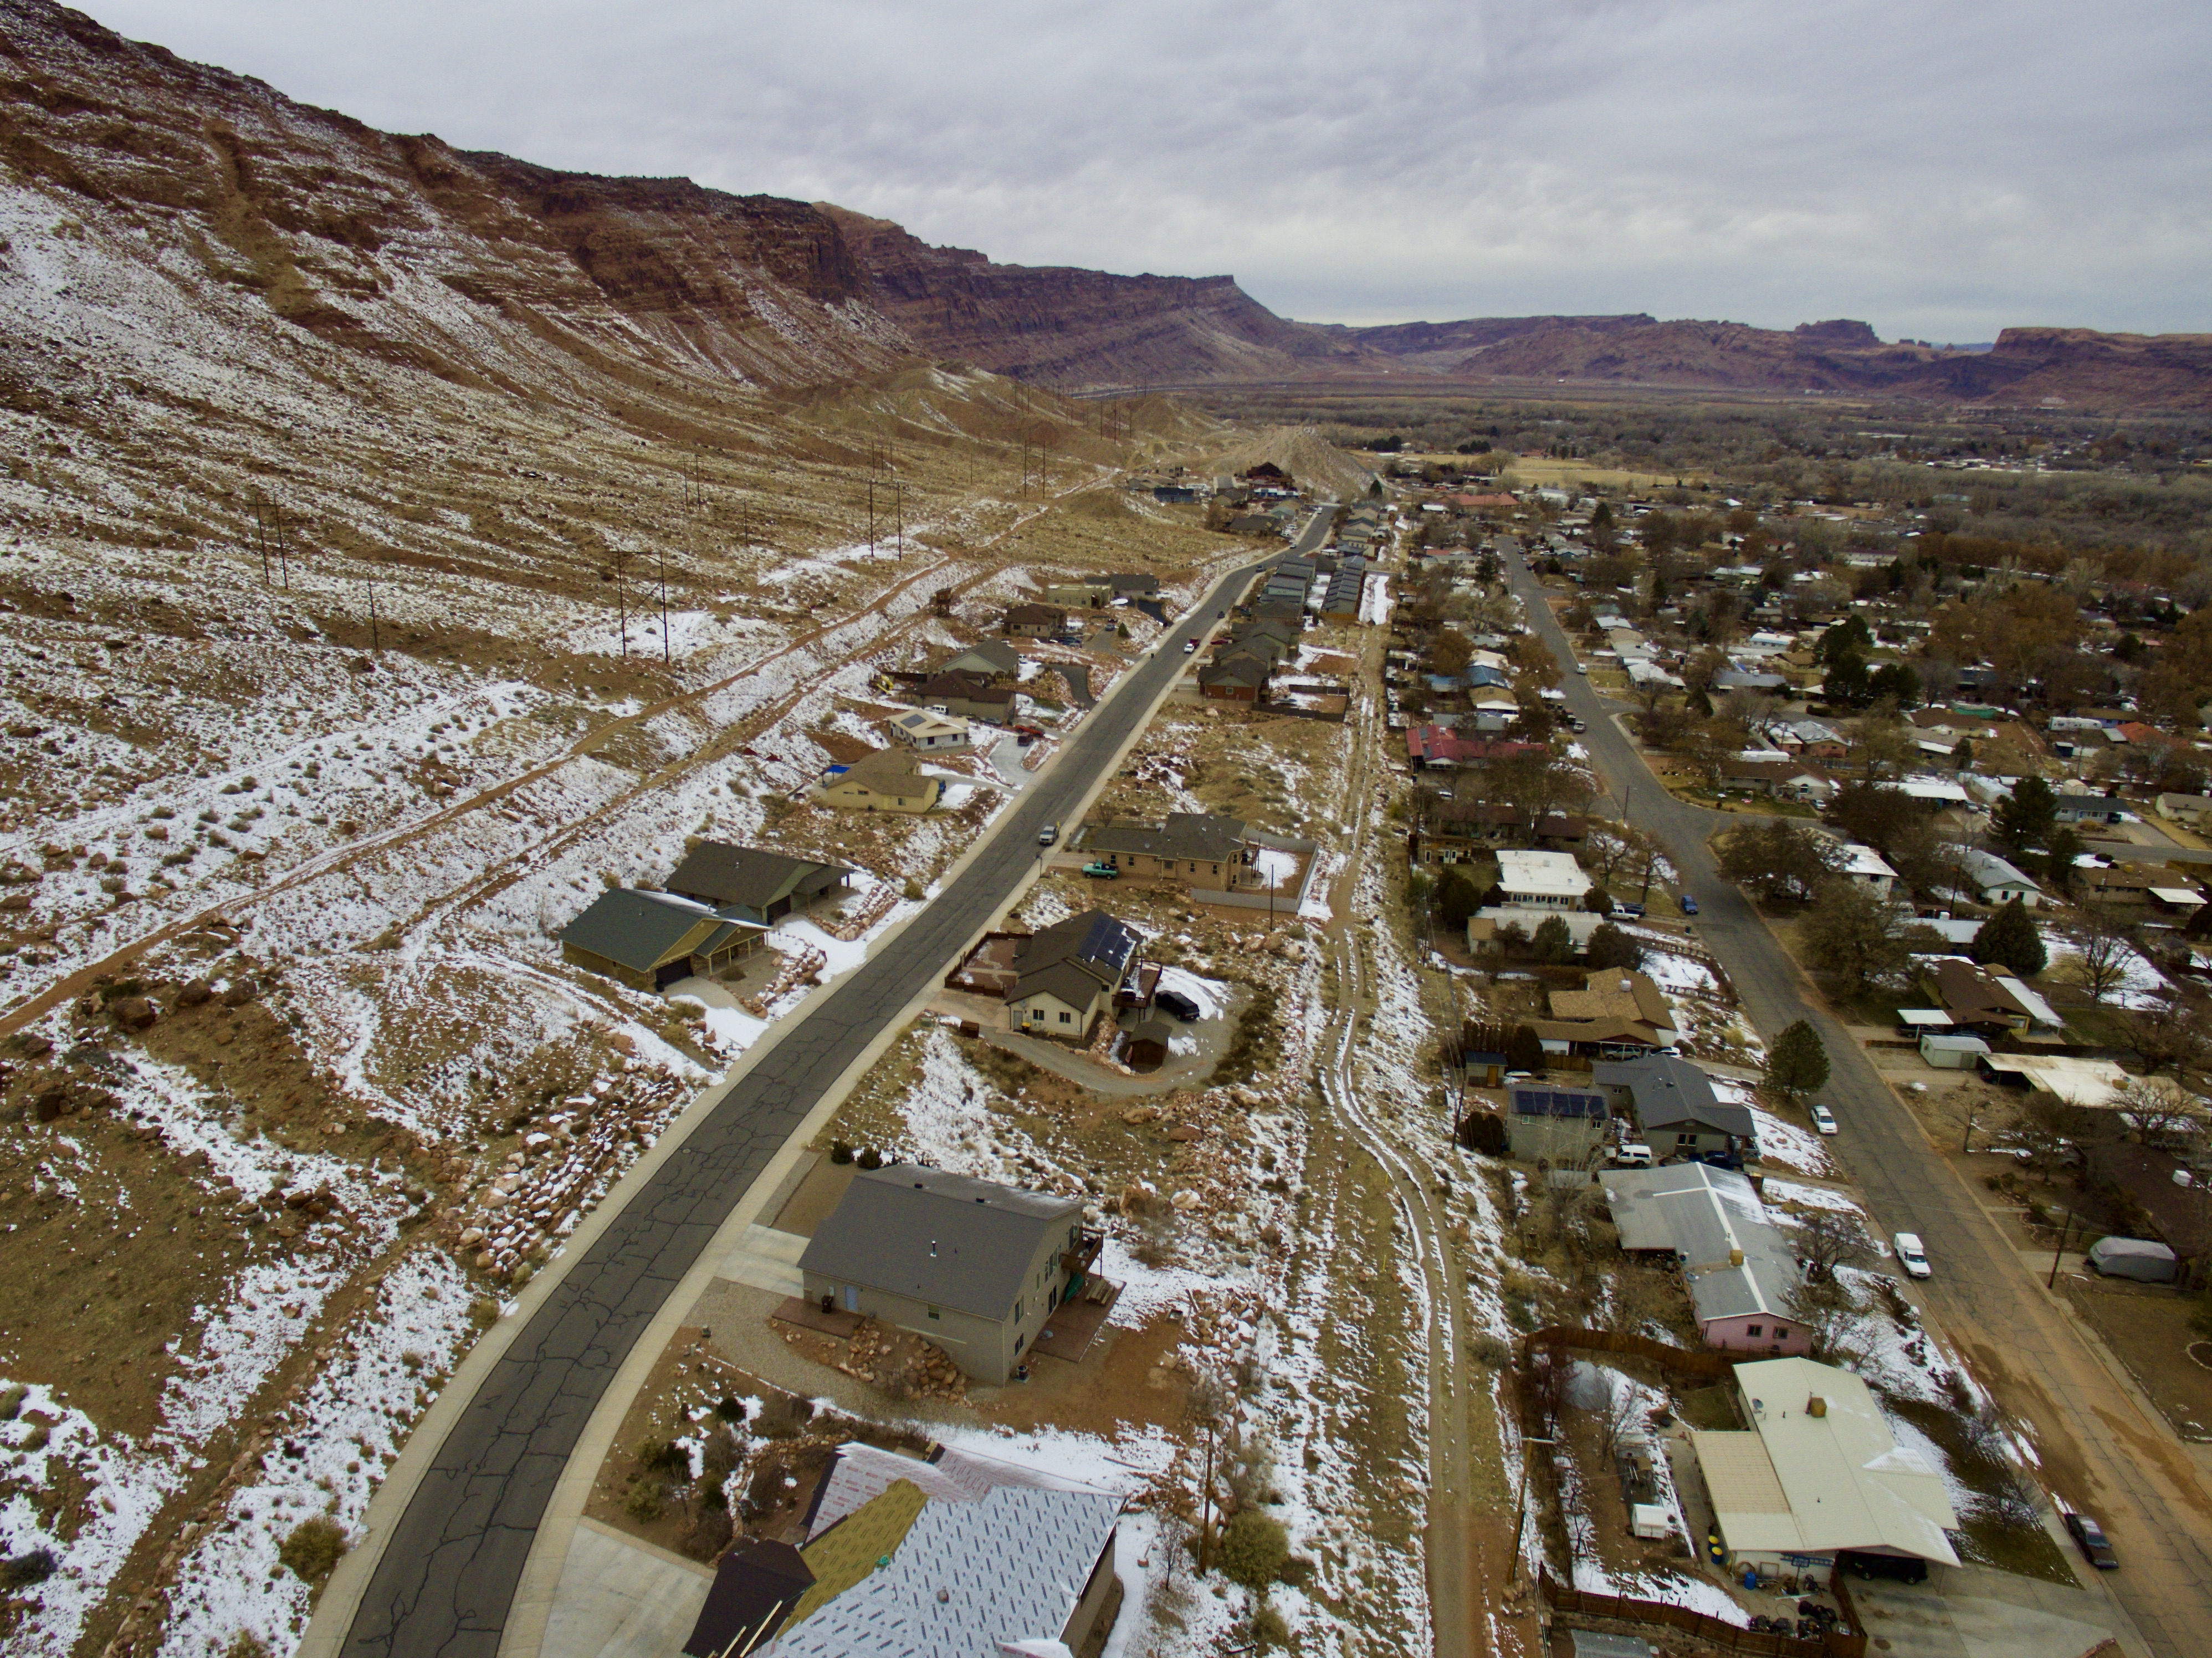 a snowy landscape with homes and, beyond the homes, a sloping area of brush, leading up to a rim of the Moab valley